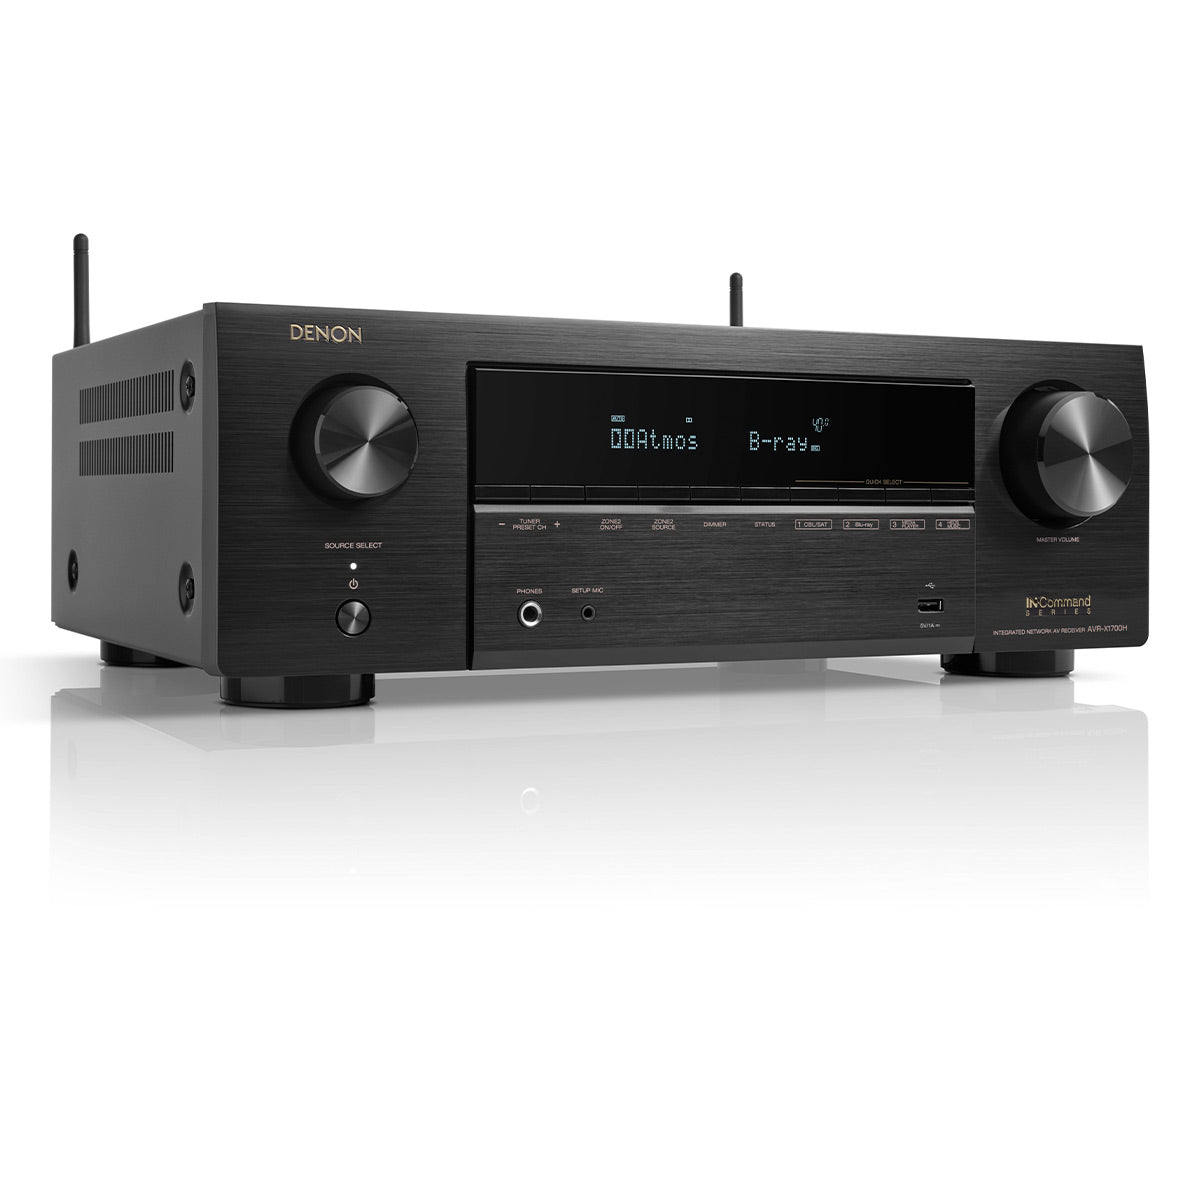 Denon AVR-X1700H 7.2ch 8K Home Theater Receiver with 3D Audio, Voice Control, and HEOS Built-In (Factory Certified Refurbished)